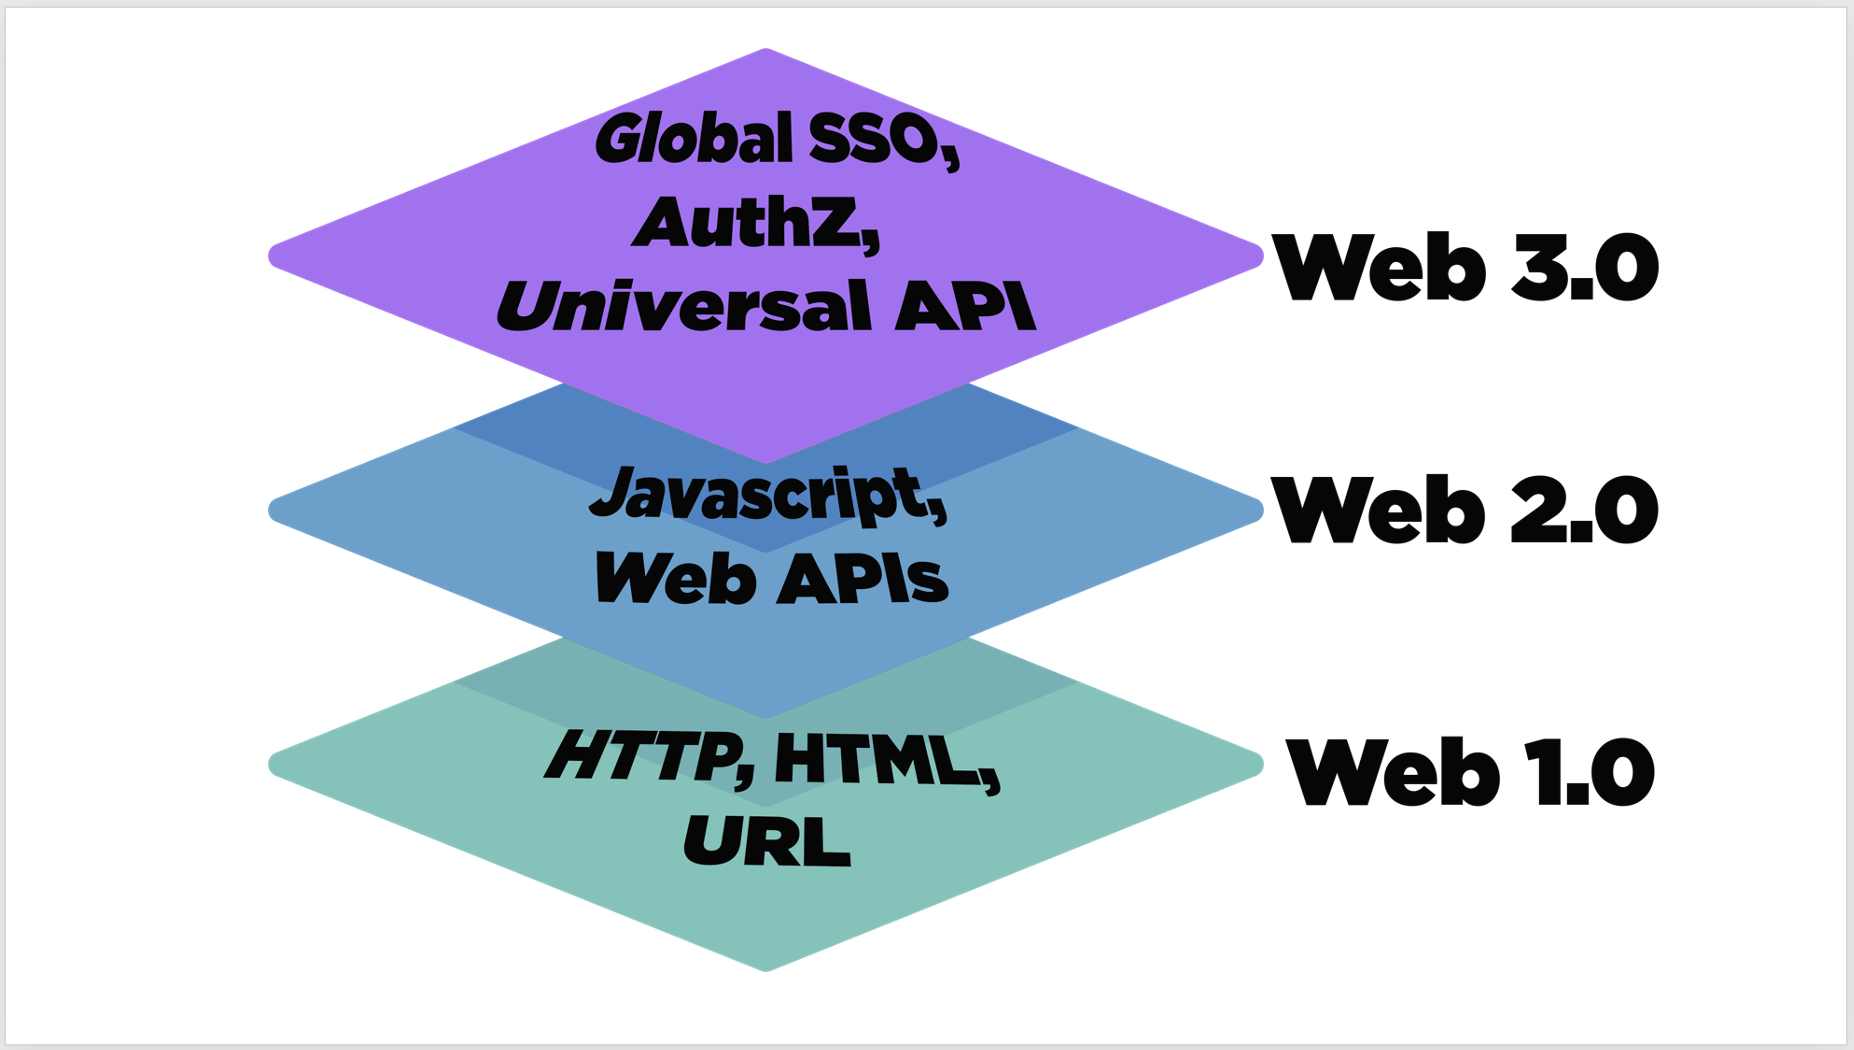 Protcol layers stack bottom to top: DNS, URI, HTTP, HTML, Javascript, Web APIs and new Solid Auth, Solid Autheorization, and Solid Universal API